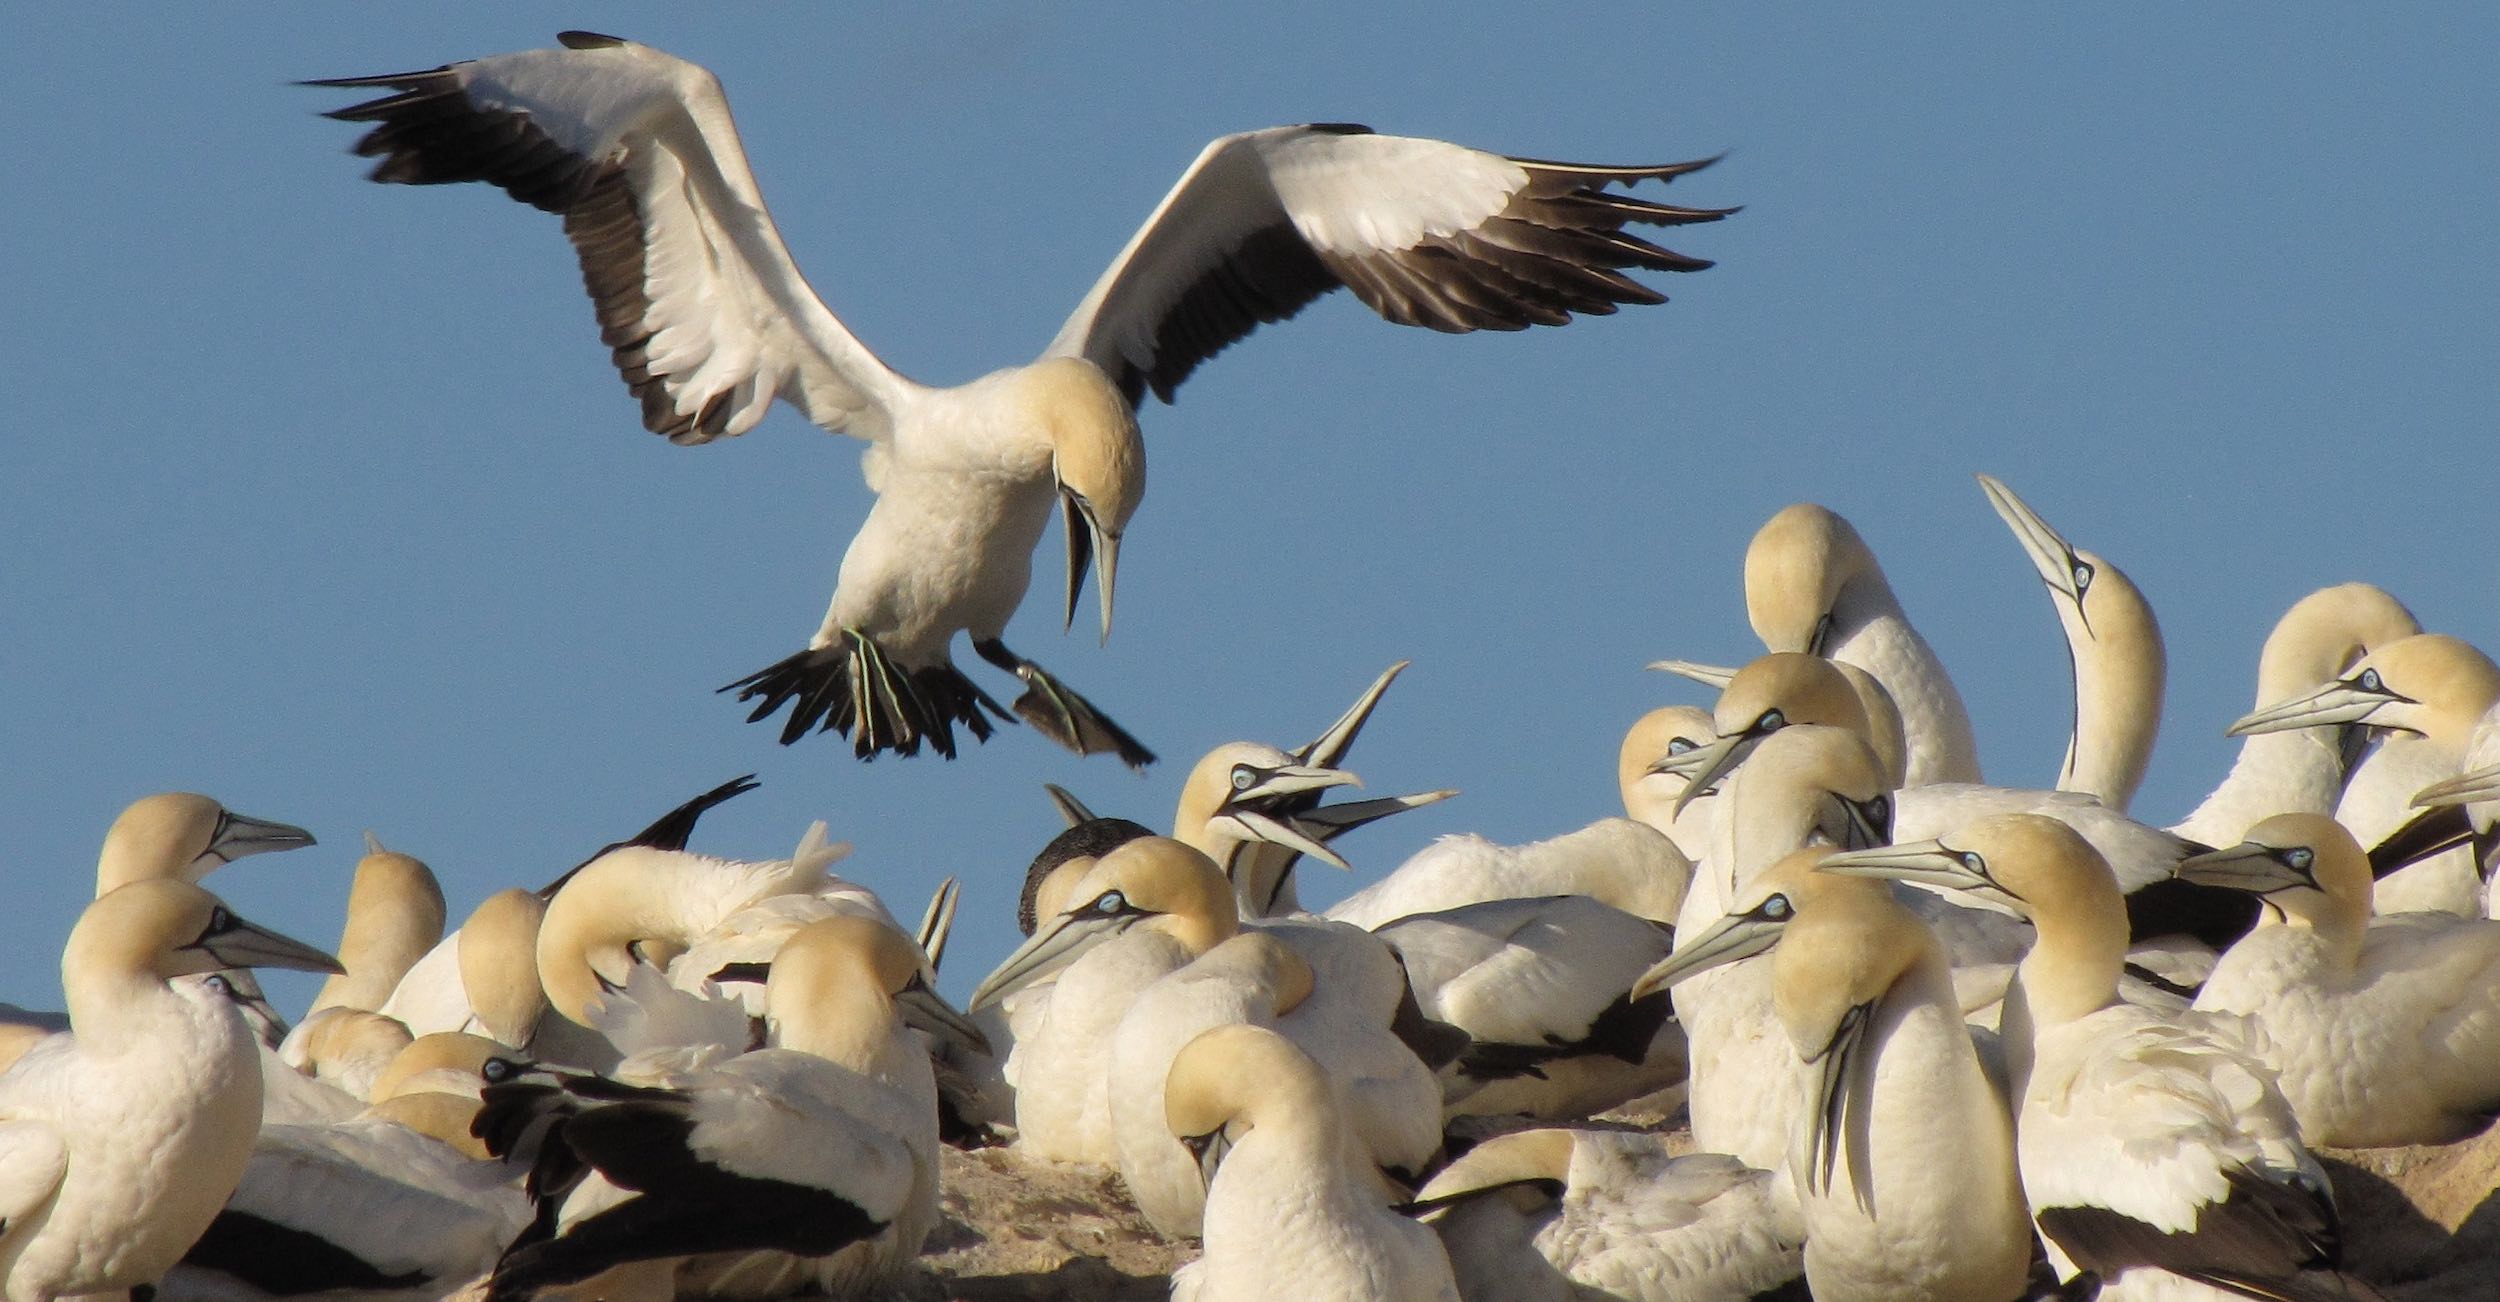 A group of Cape Gannet on rocks, with another about to land.